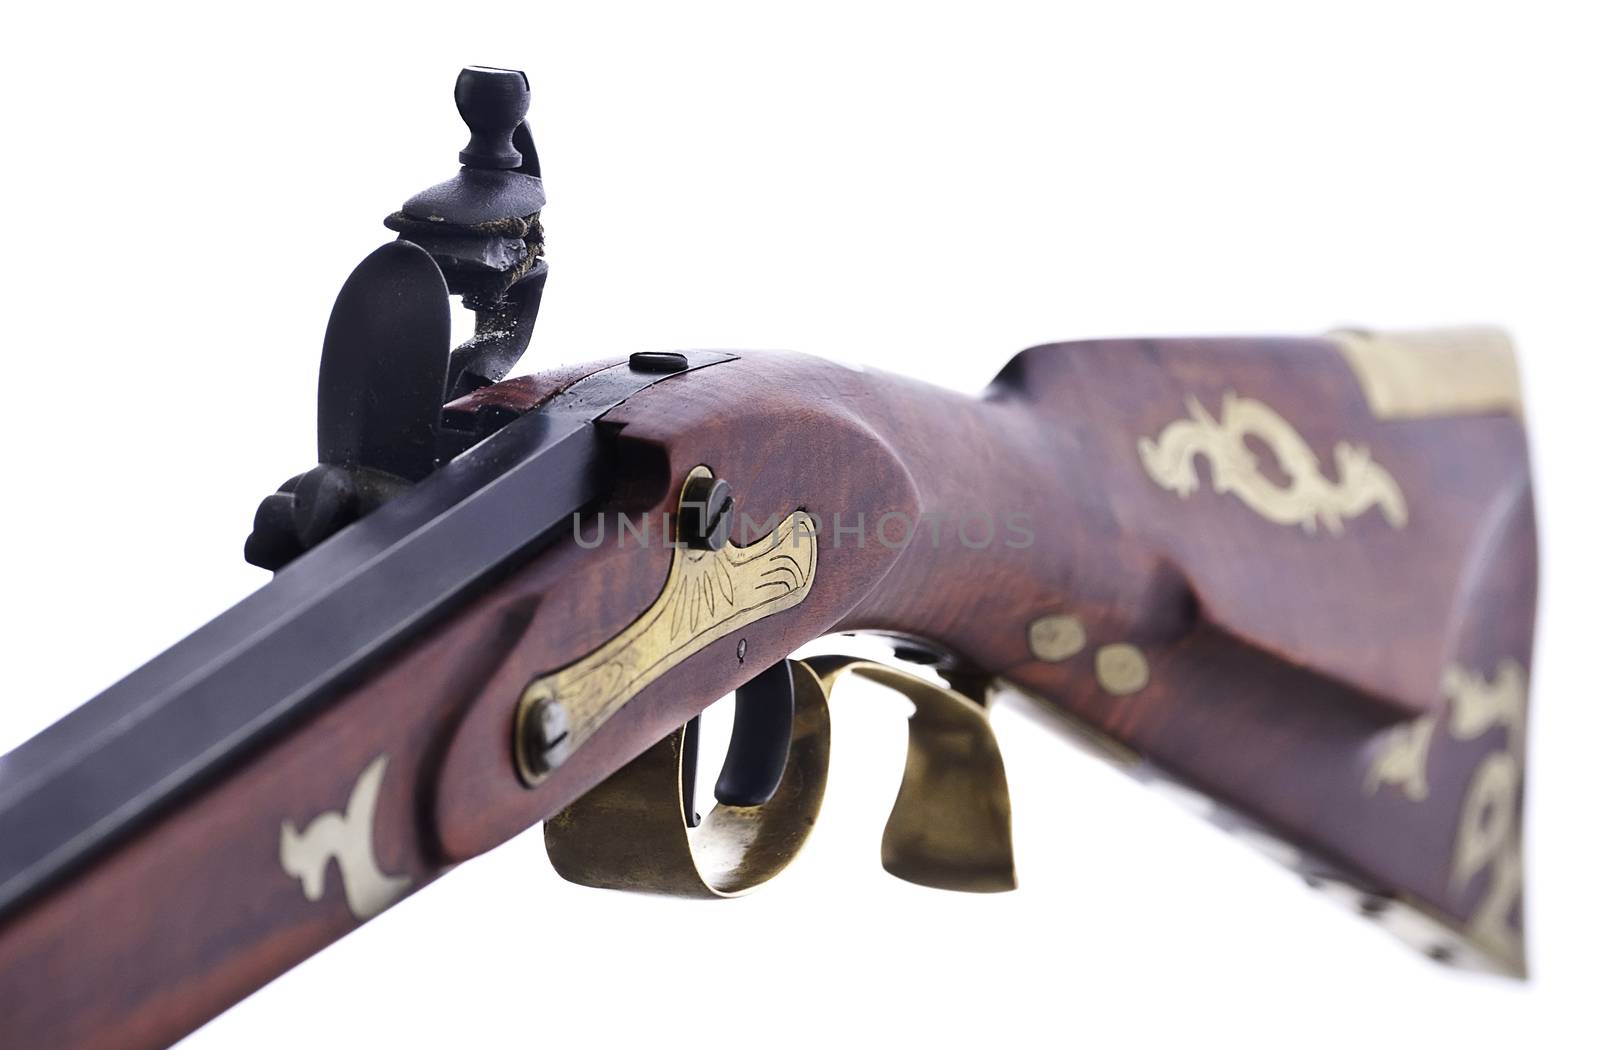 Replica flint lock rifle, close up fiew shoing the inlayed brass and engravings.